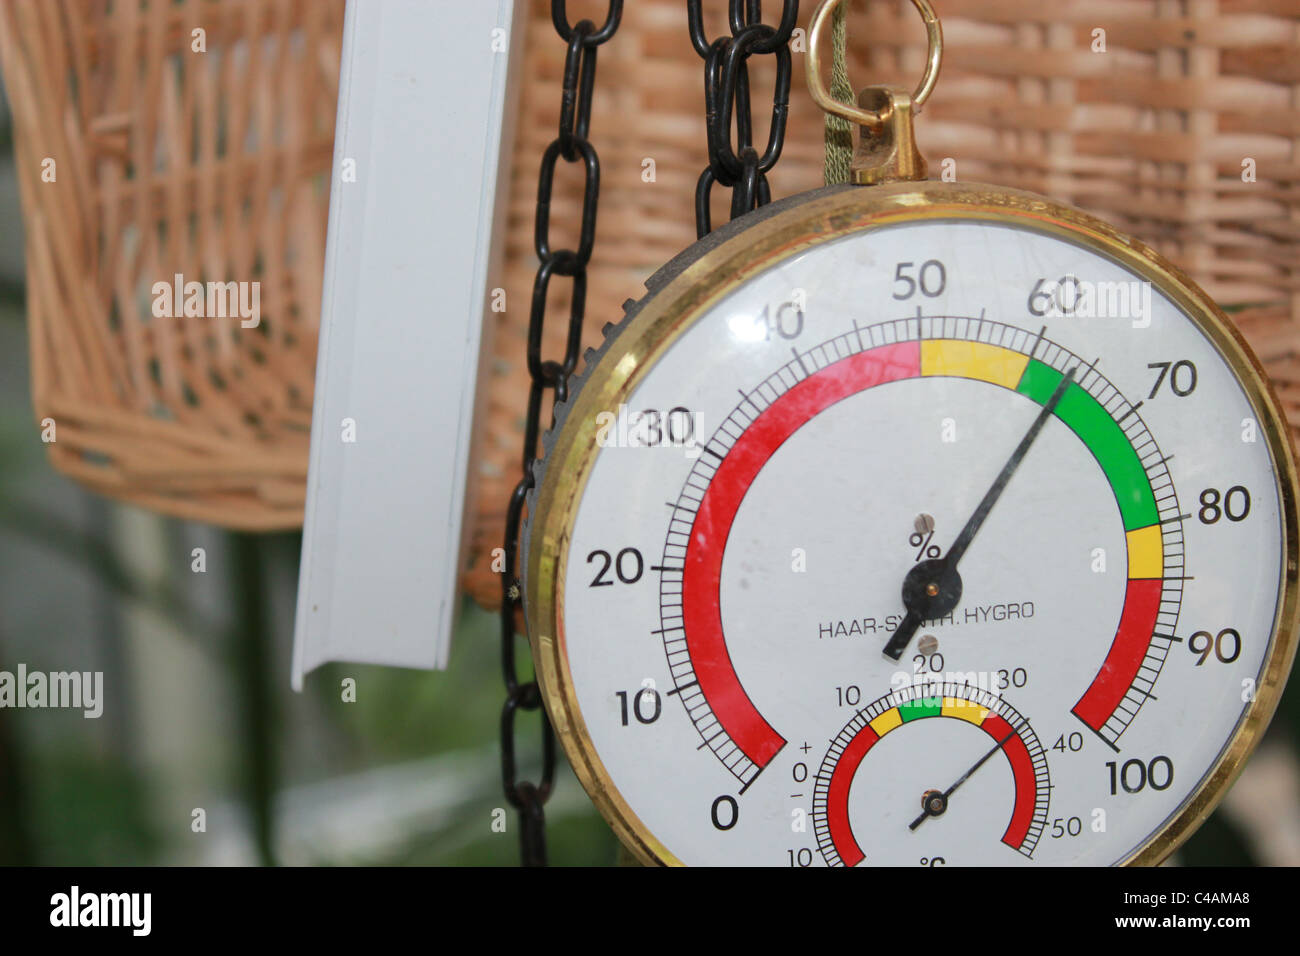 https://c8.alamy.com/comp/C4AMA8/a-colorful-humidity-and-temperature-meter-with-a-basket-C4AMA8.jpg